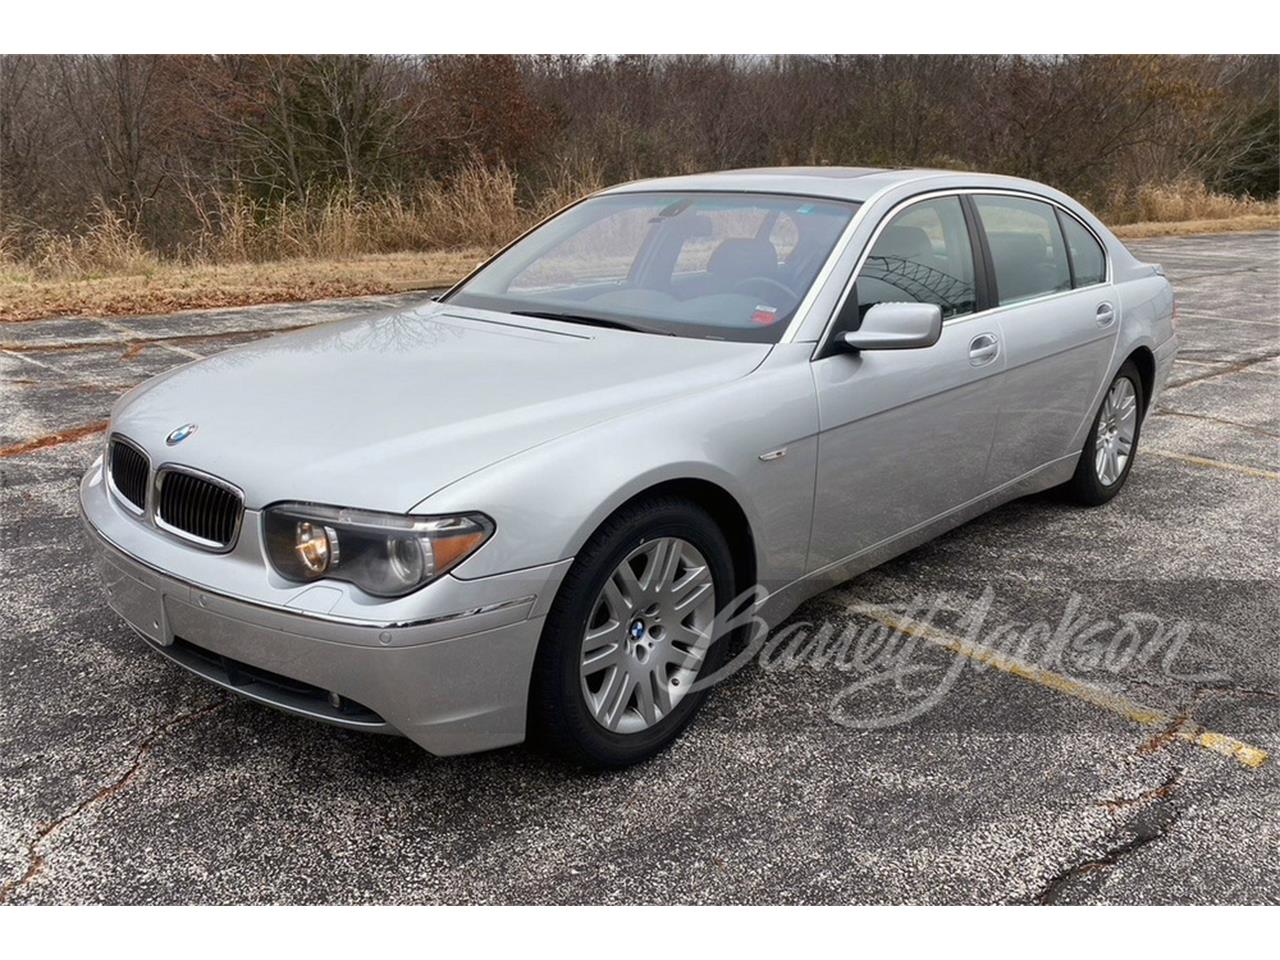 For Sale at Auction: 2002 BMW 7 Series in Scottsdale, Arizona for sale in Scottsdale, AZ